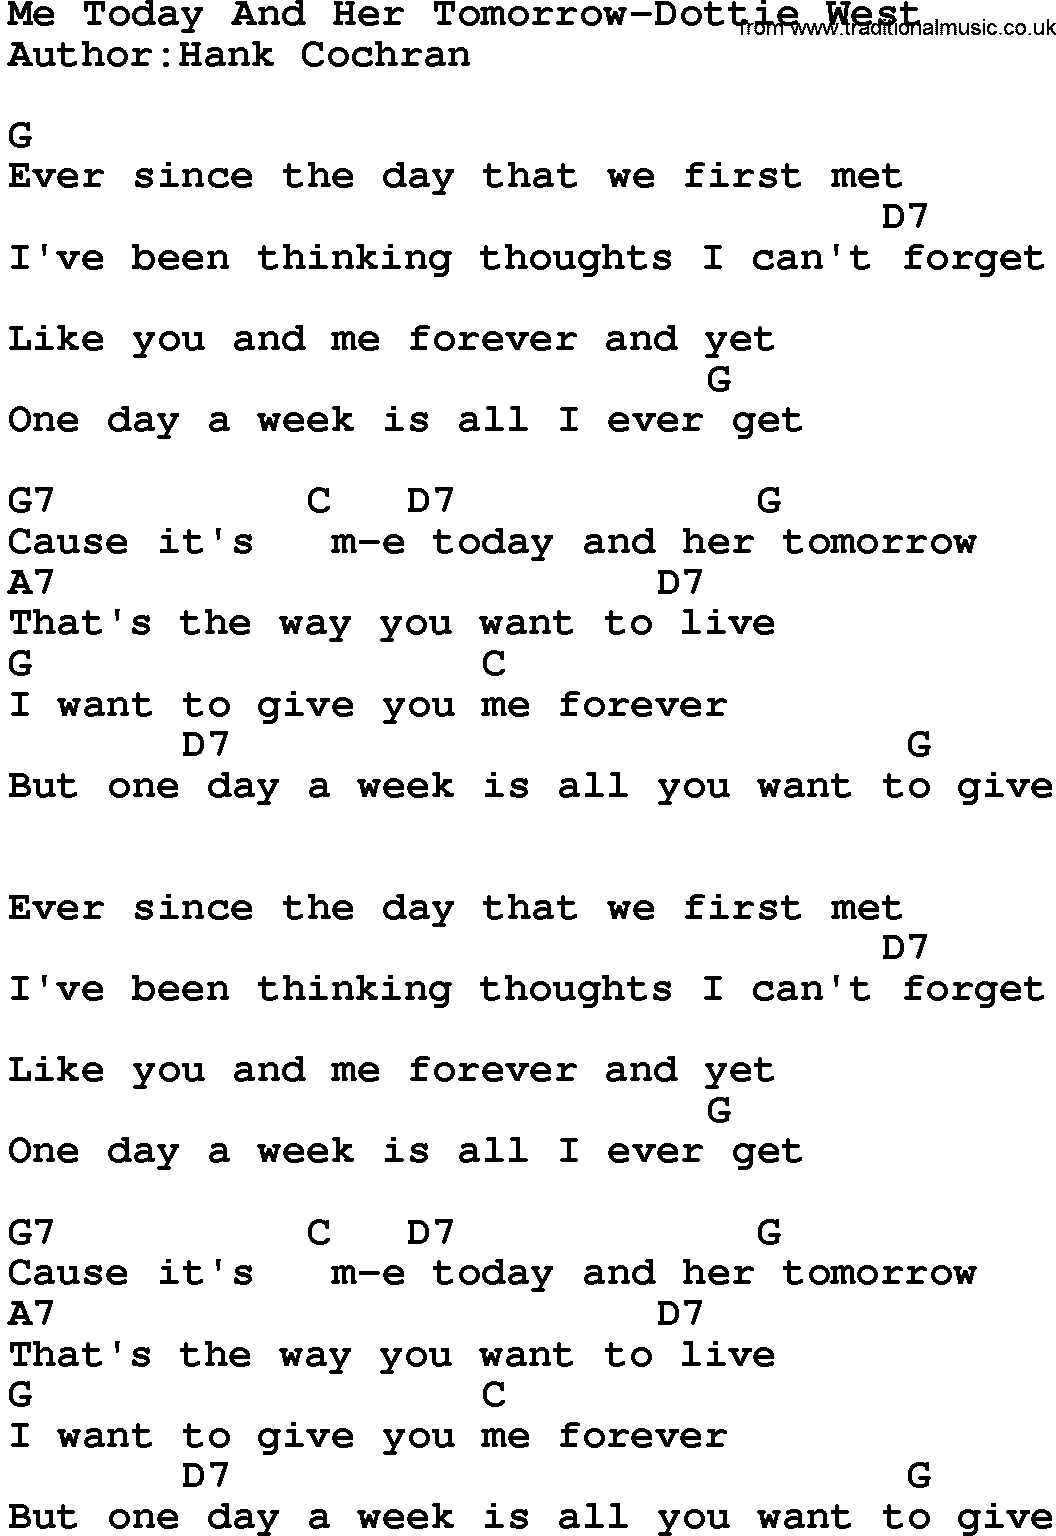 Country music song: Me Today And Her Tomorrow-Dottie West lyrics and chords